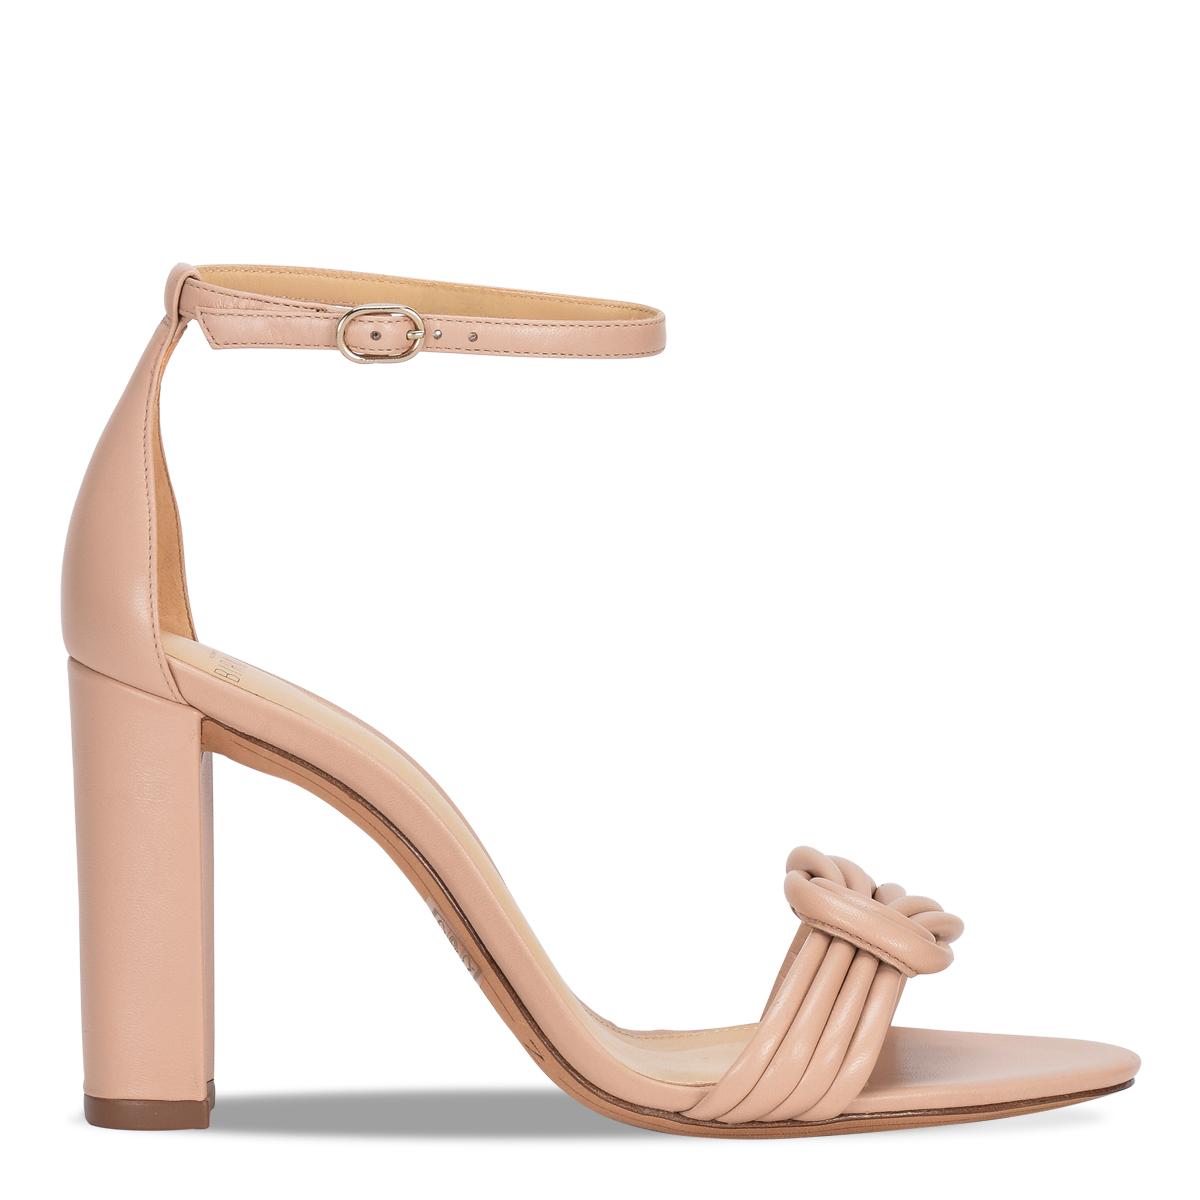 Alexandre Birman Vicky Knot Leather Sandals in Light Sand (Natural ...